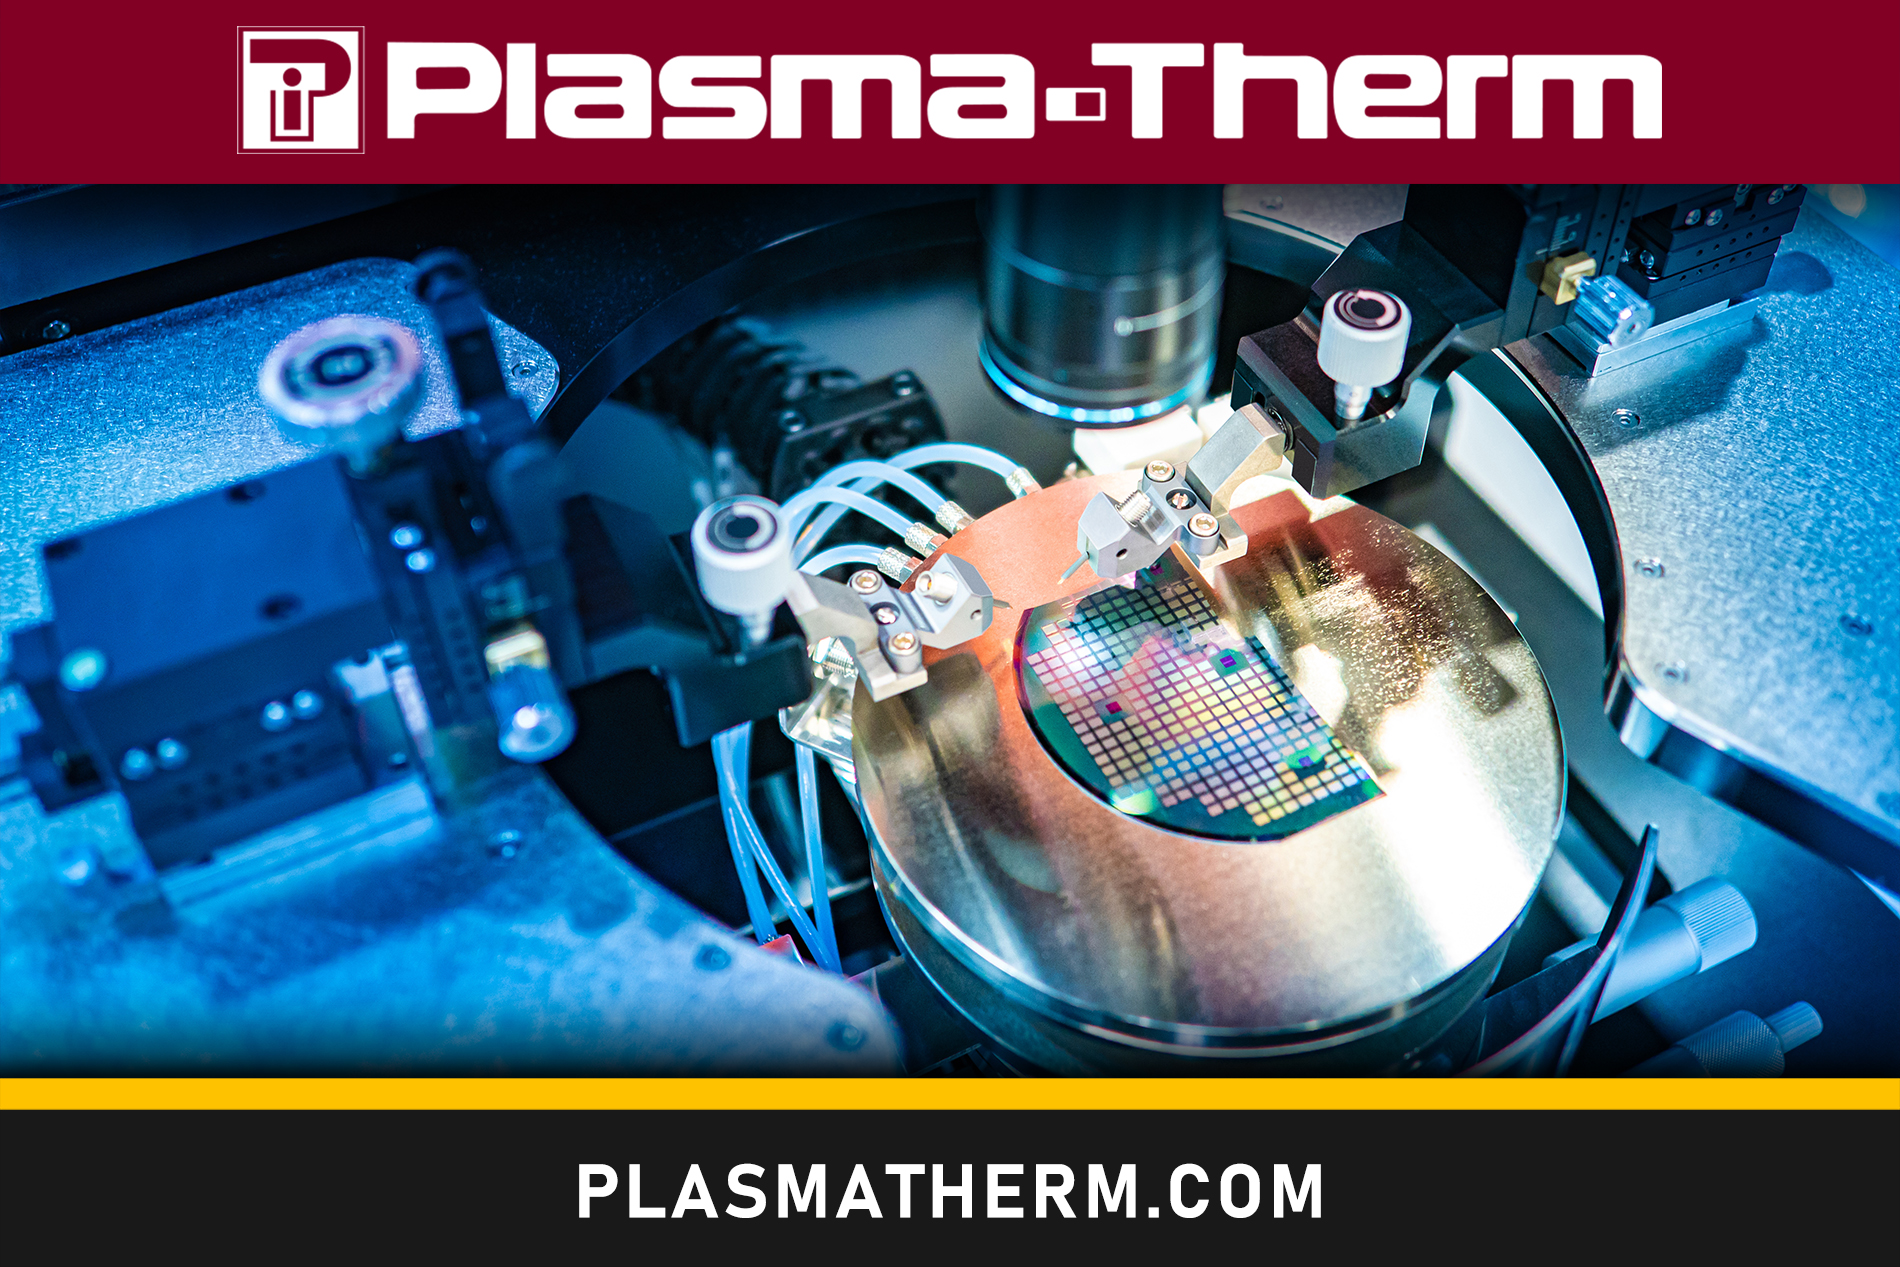 Semiconductor Chip Manufacturing - Plasma-Therm rev1